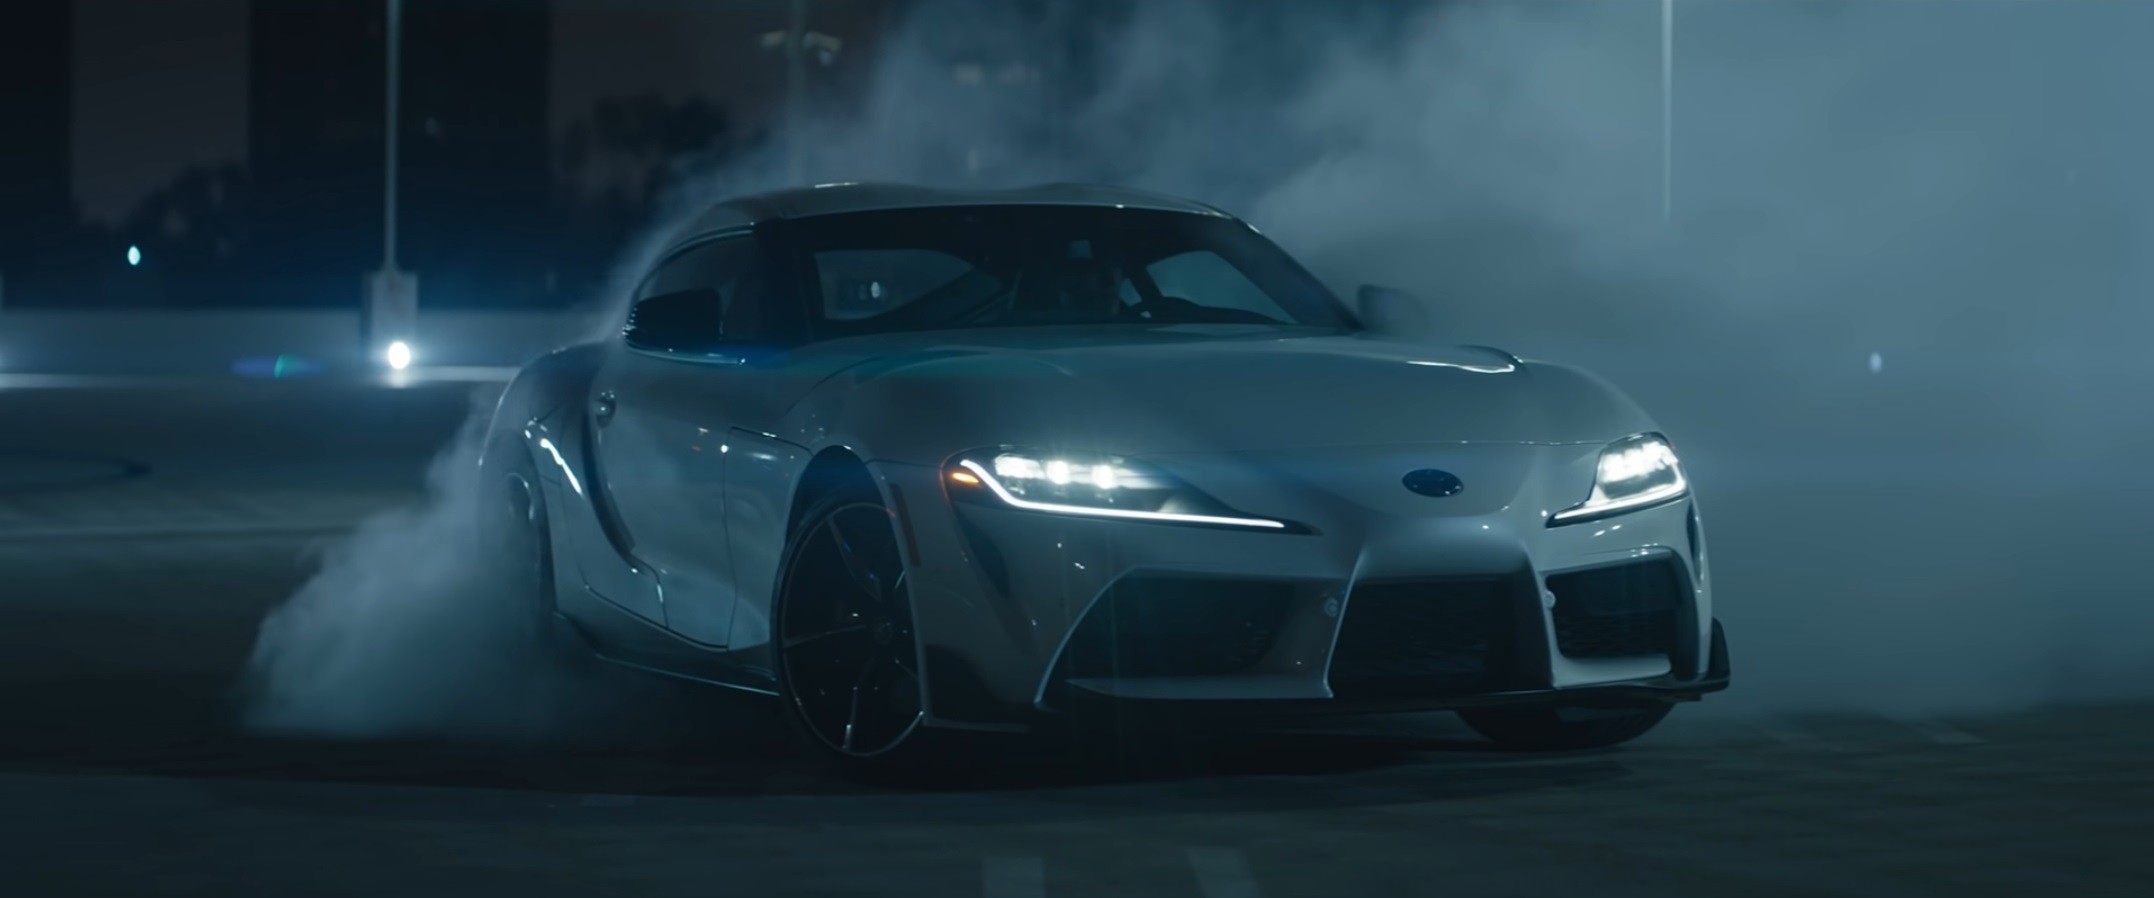 Harmonie provincie pit 2022 Toyota GR Supra U.S. Commercial Is a Tale of Haze and Grocery Shopping  - autoevolution